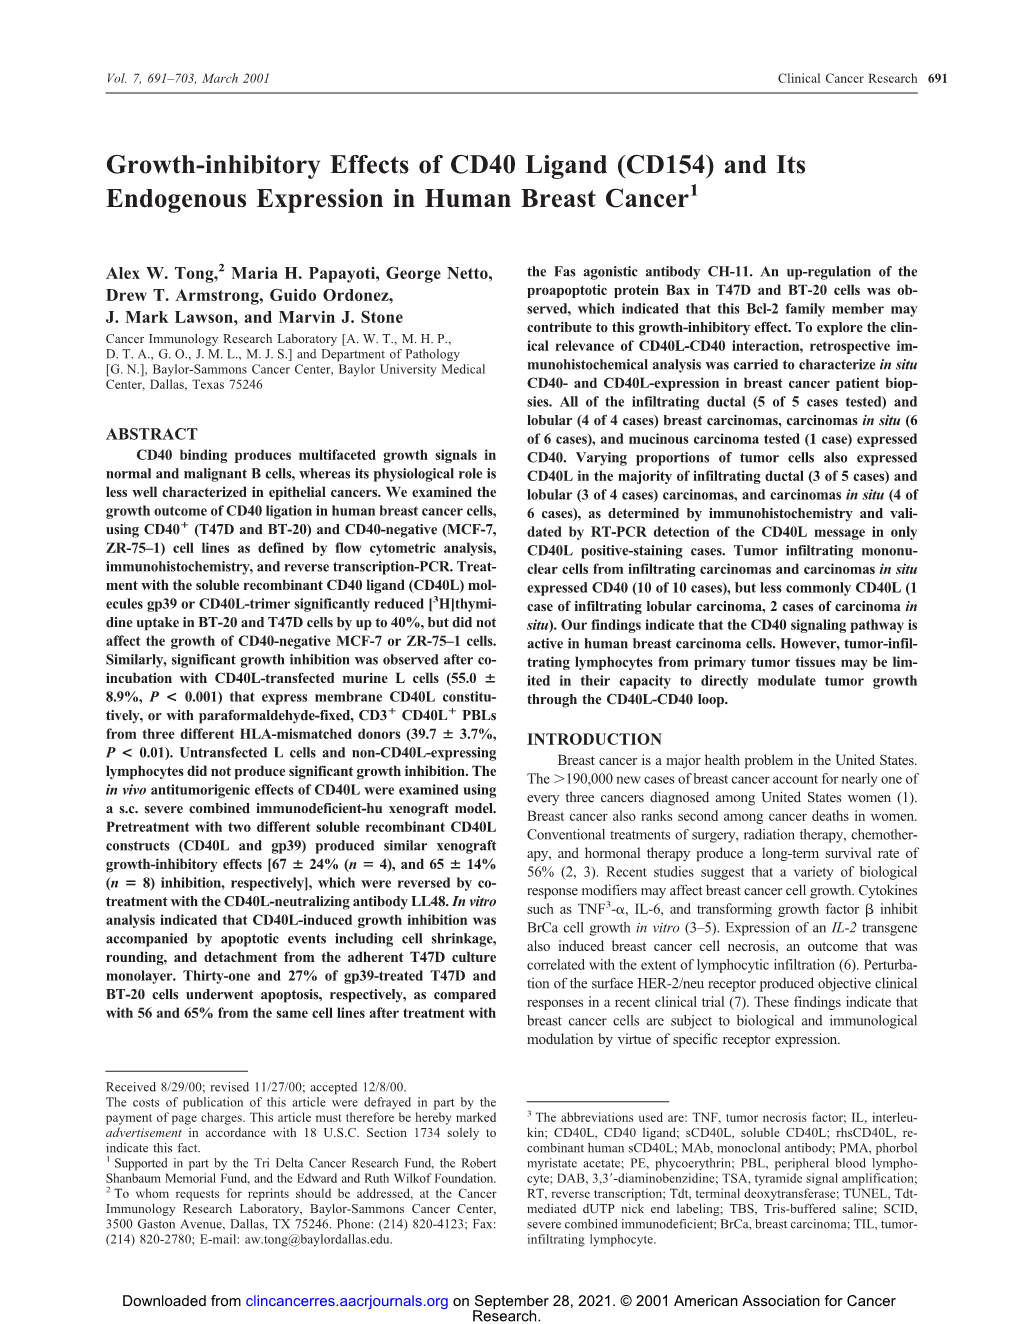 Growth-Inhibitory Effects of CD40 Ligand (CD154) and Its Endogenous Expression in Human Breast Cancer1